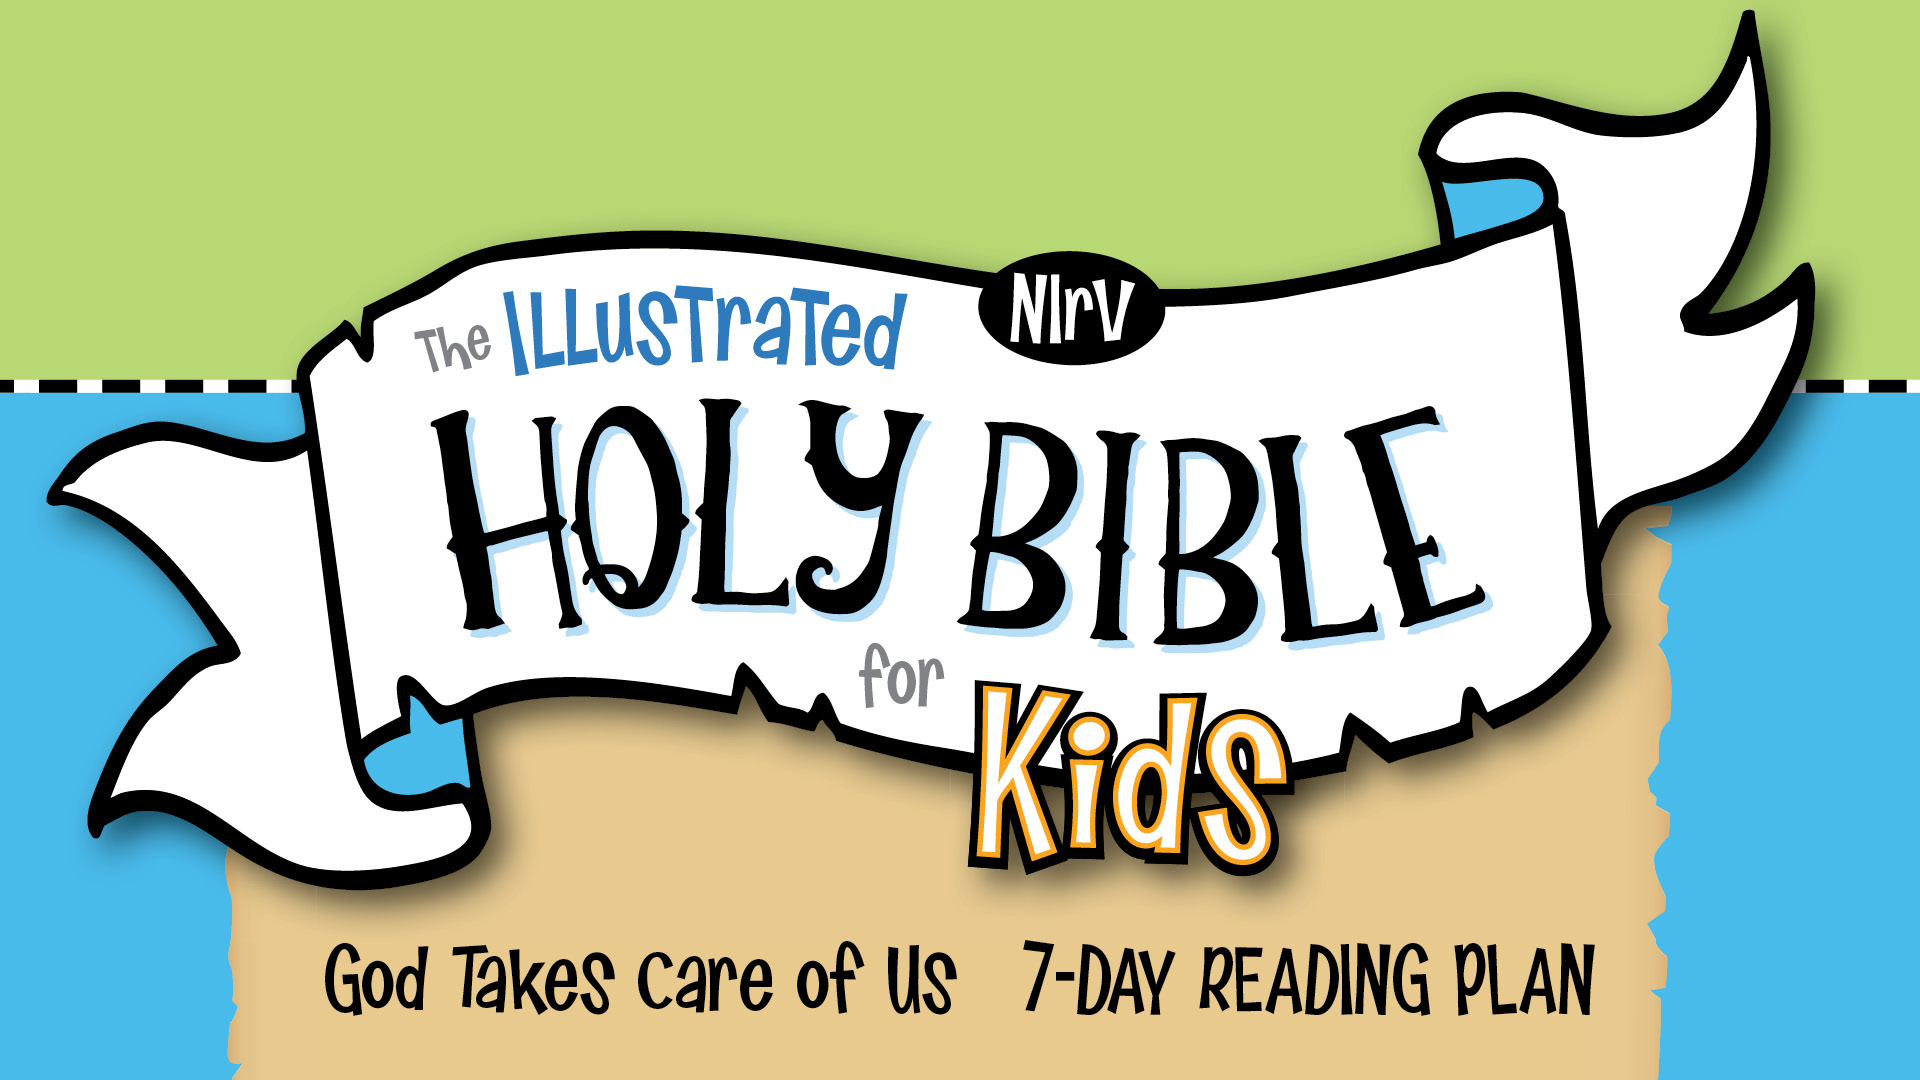 NIrV Illustrated Holy Bible 7 Day Reading Plan